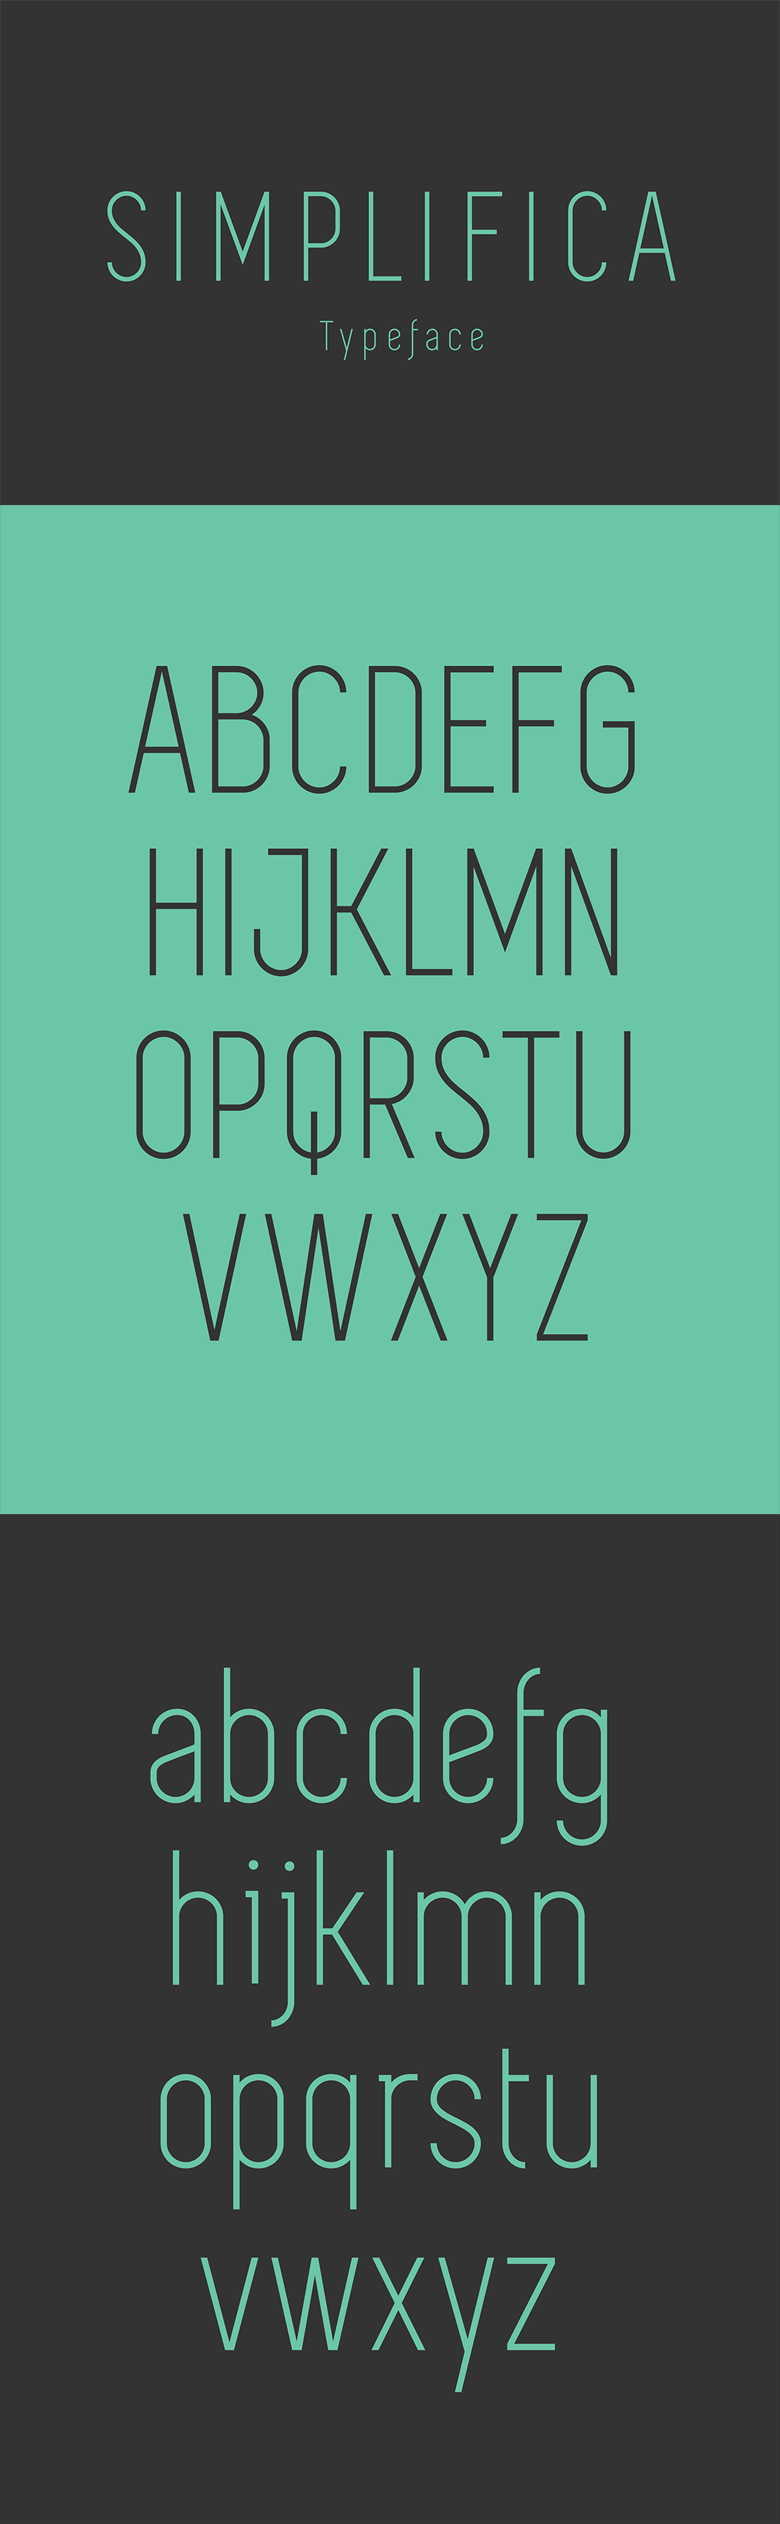 Beautiful, creative free fonts for designers - Simplifica